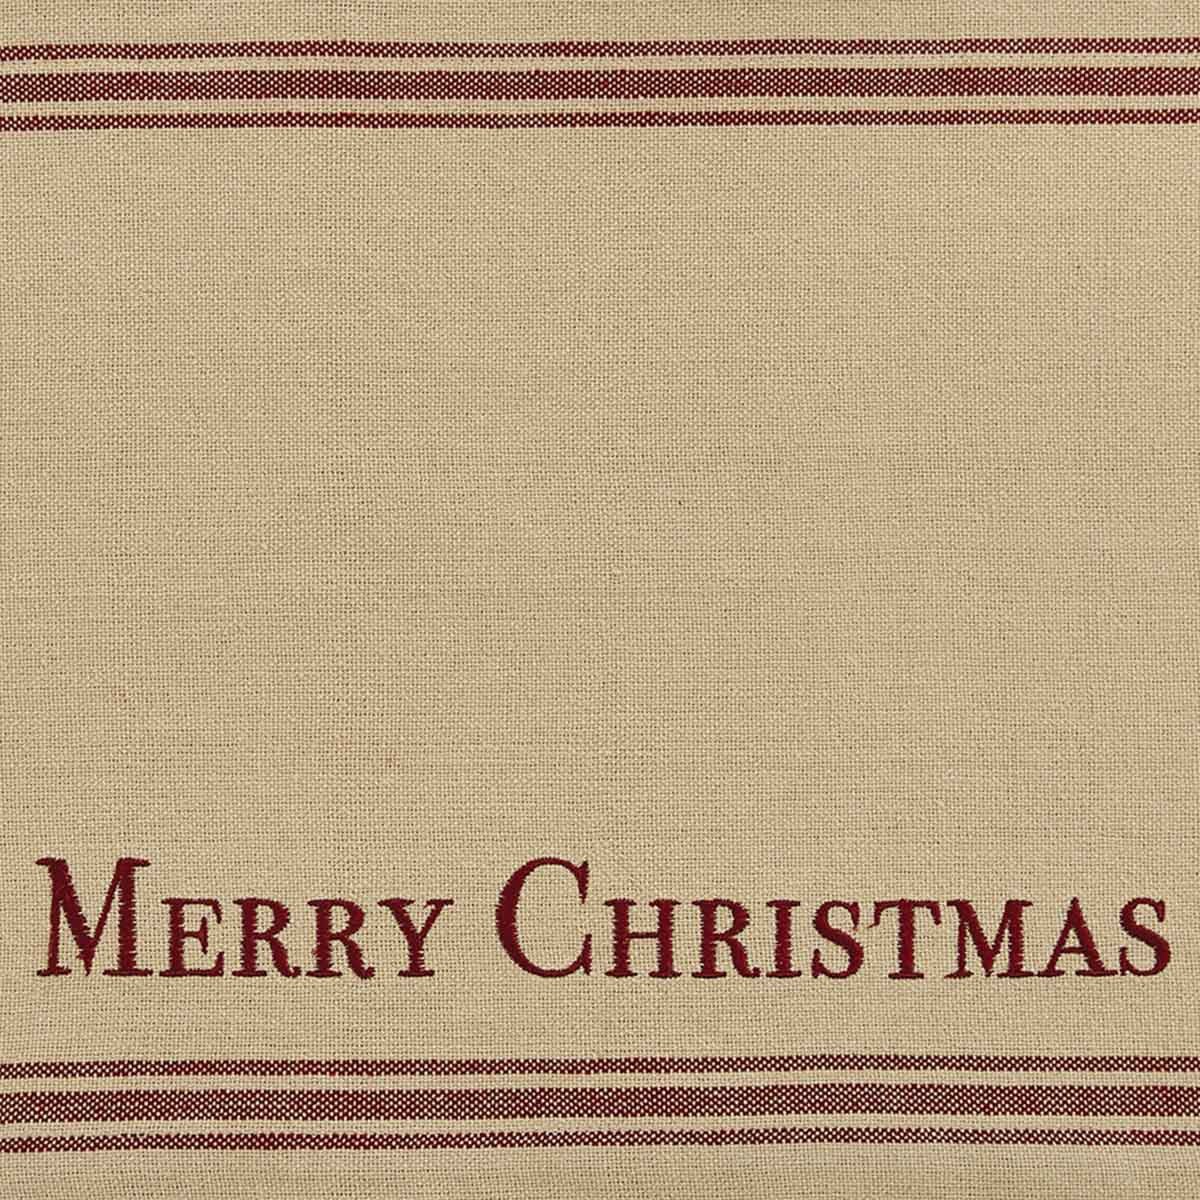 Christmas Greeting Embroidered Placemats - Set of 6 Park Designs